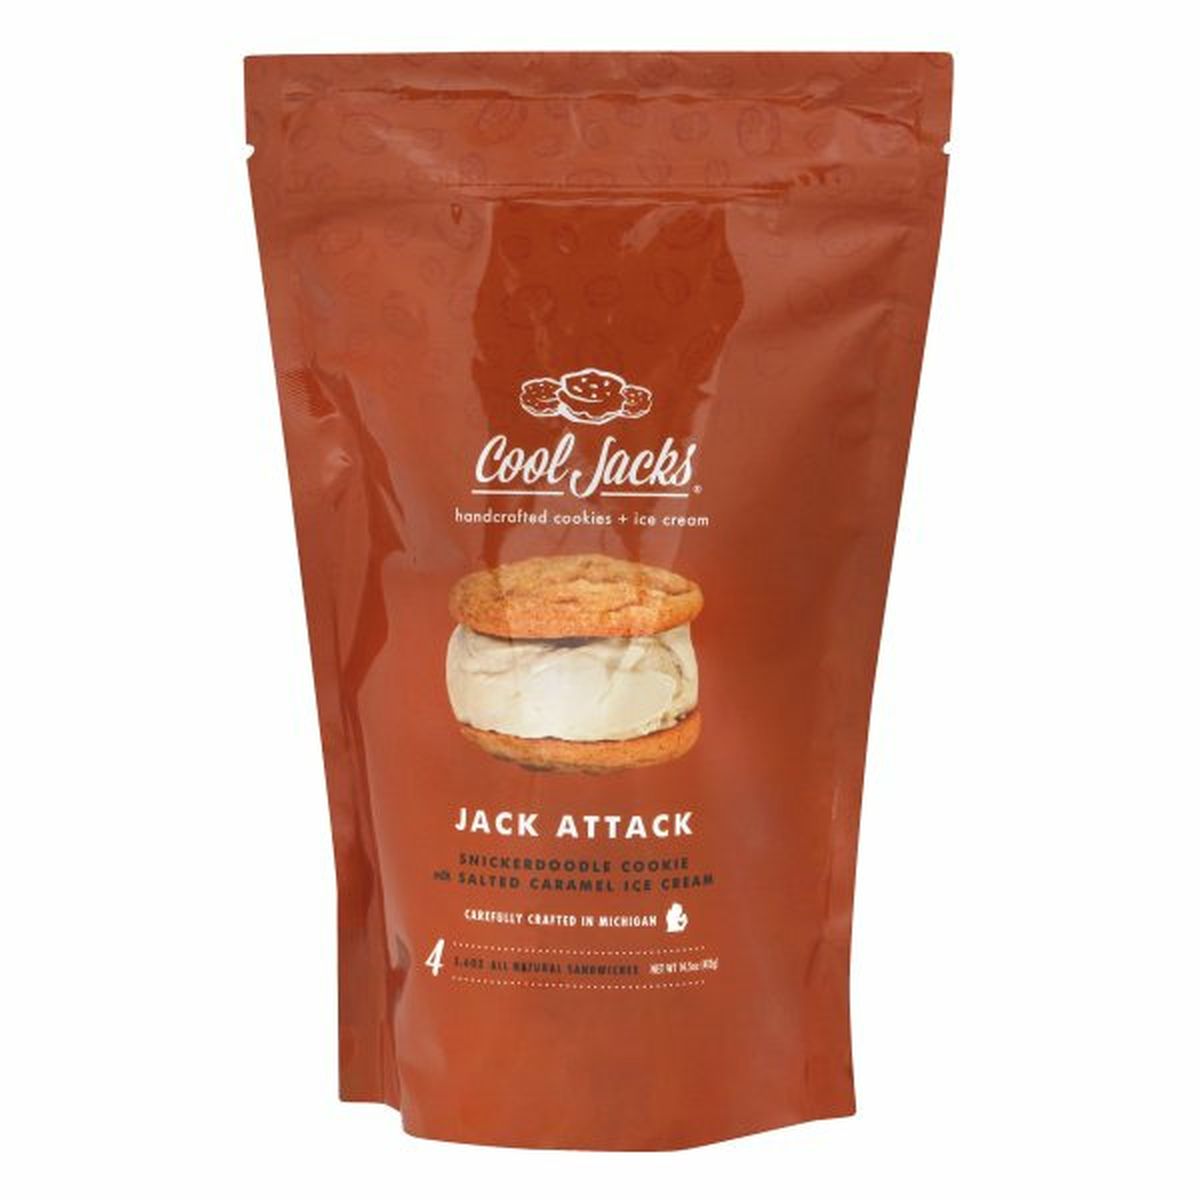 Calories in Cool Jacks Ice Cream Sandwiches, Jack Attack